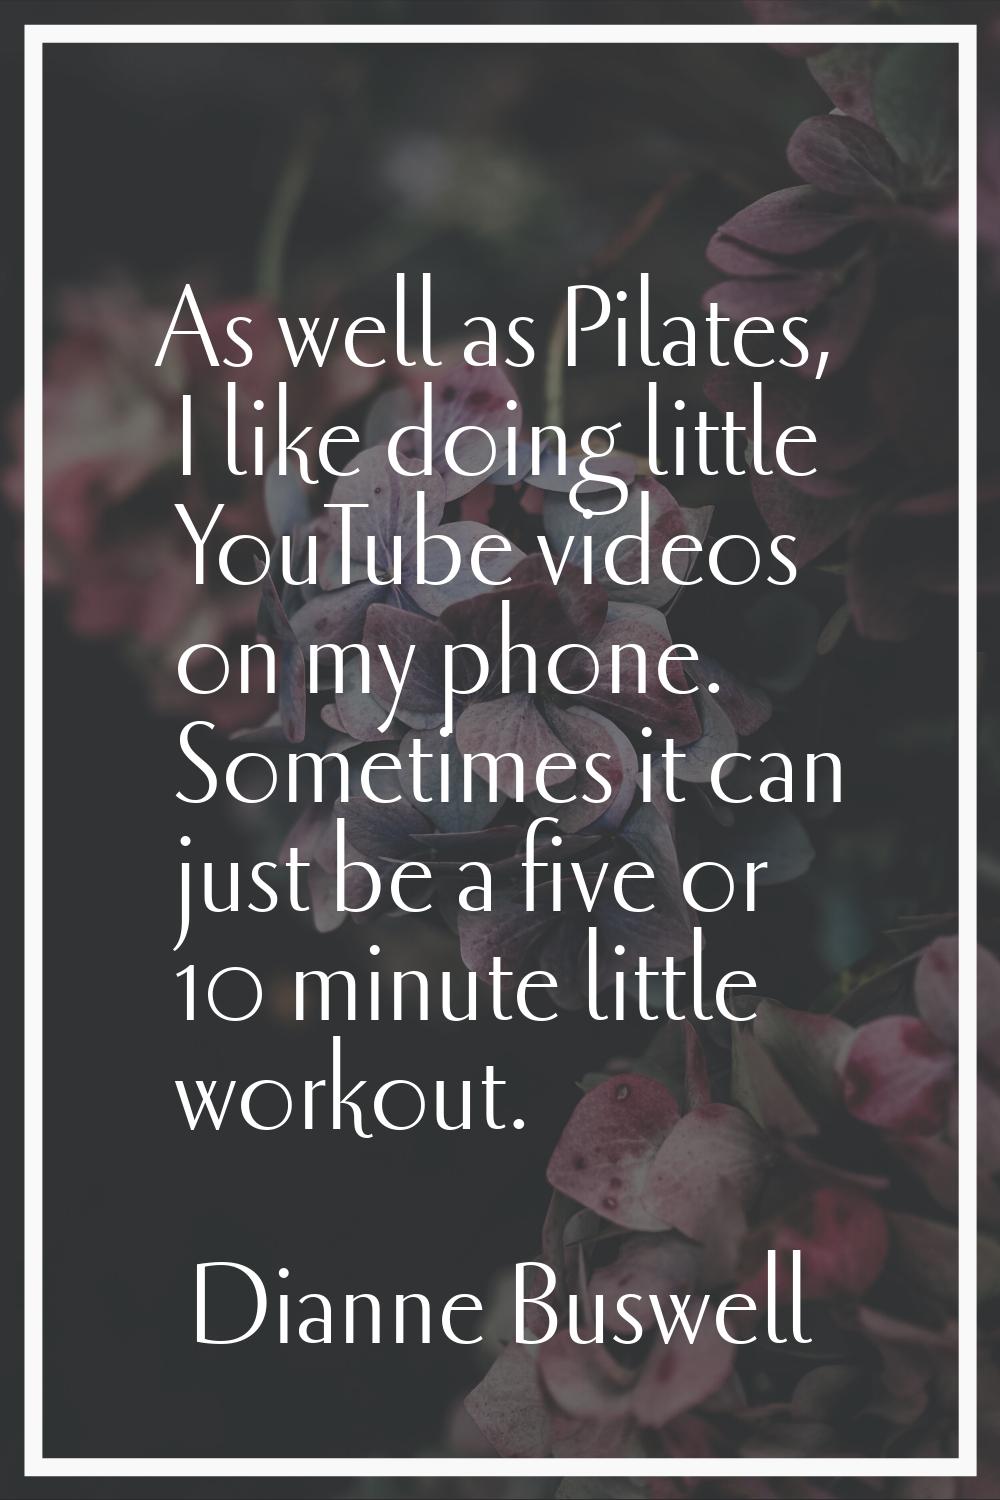 As well as Pilates, I like doing little YouTube videos on my phone. Sometimes it can just be a five